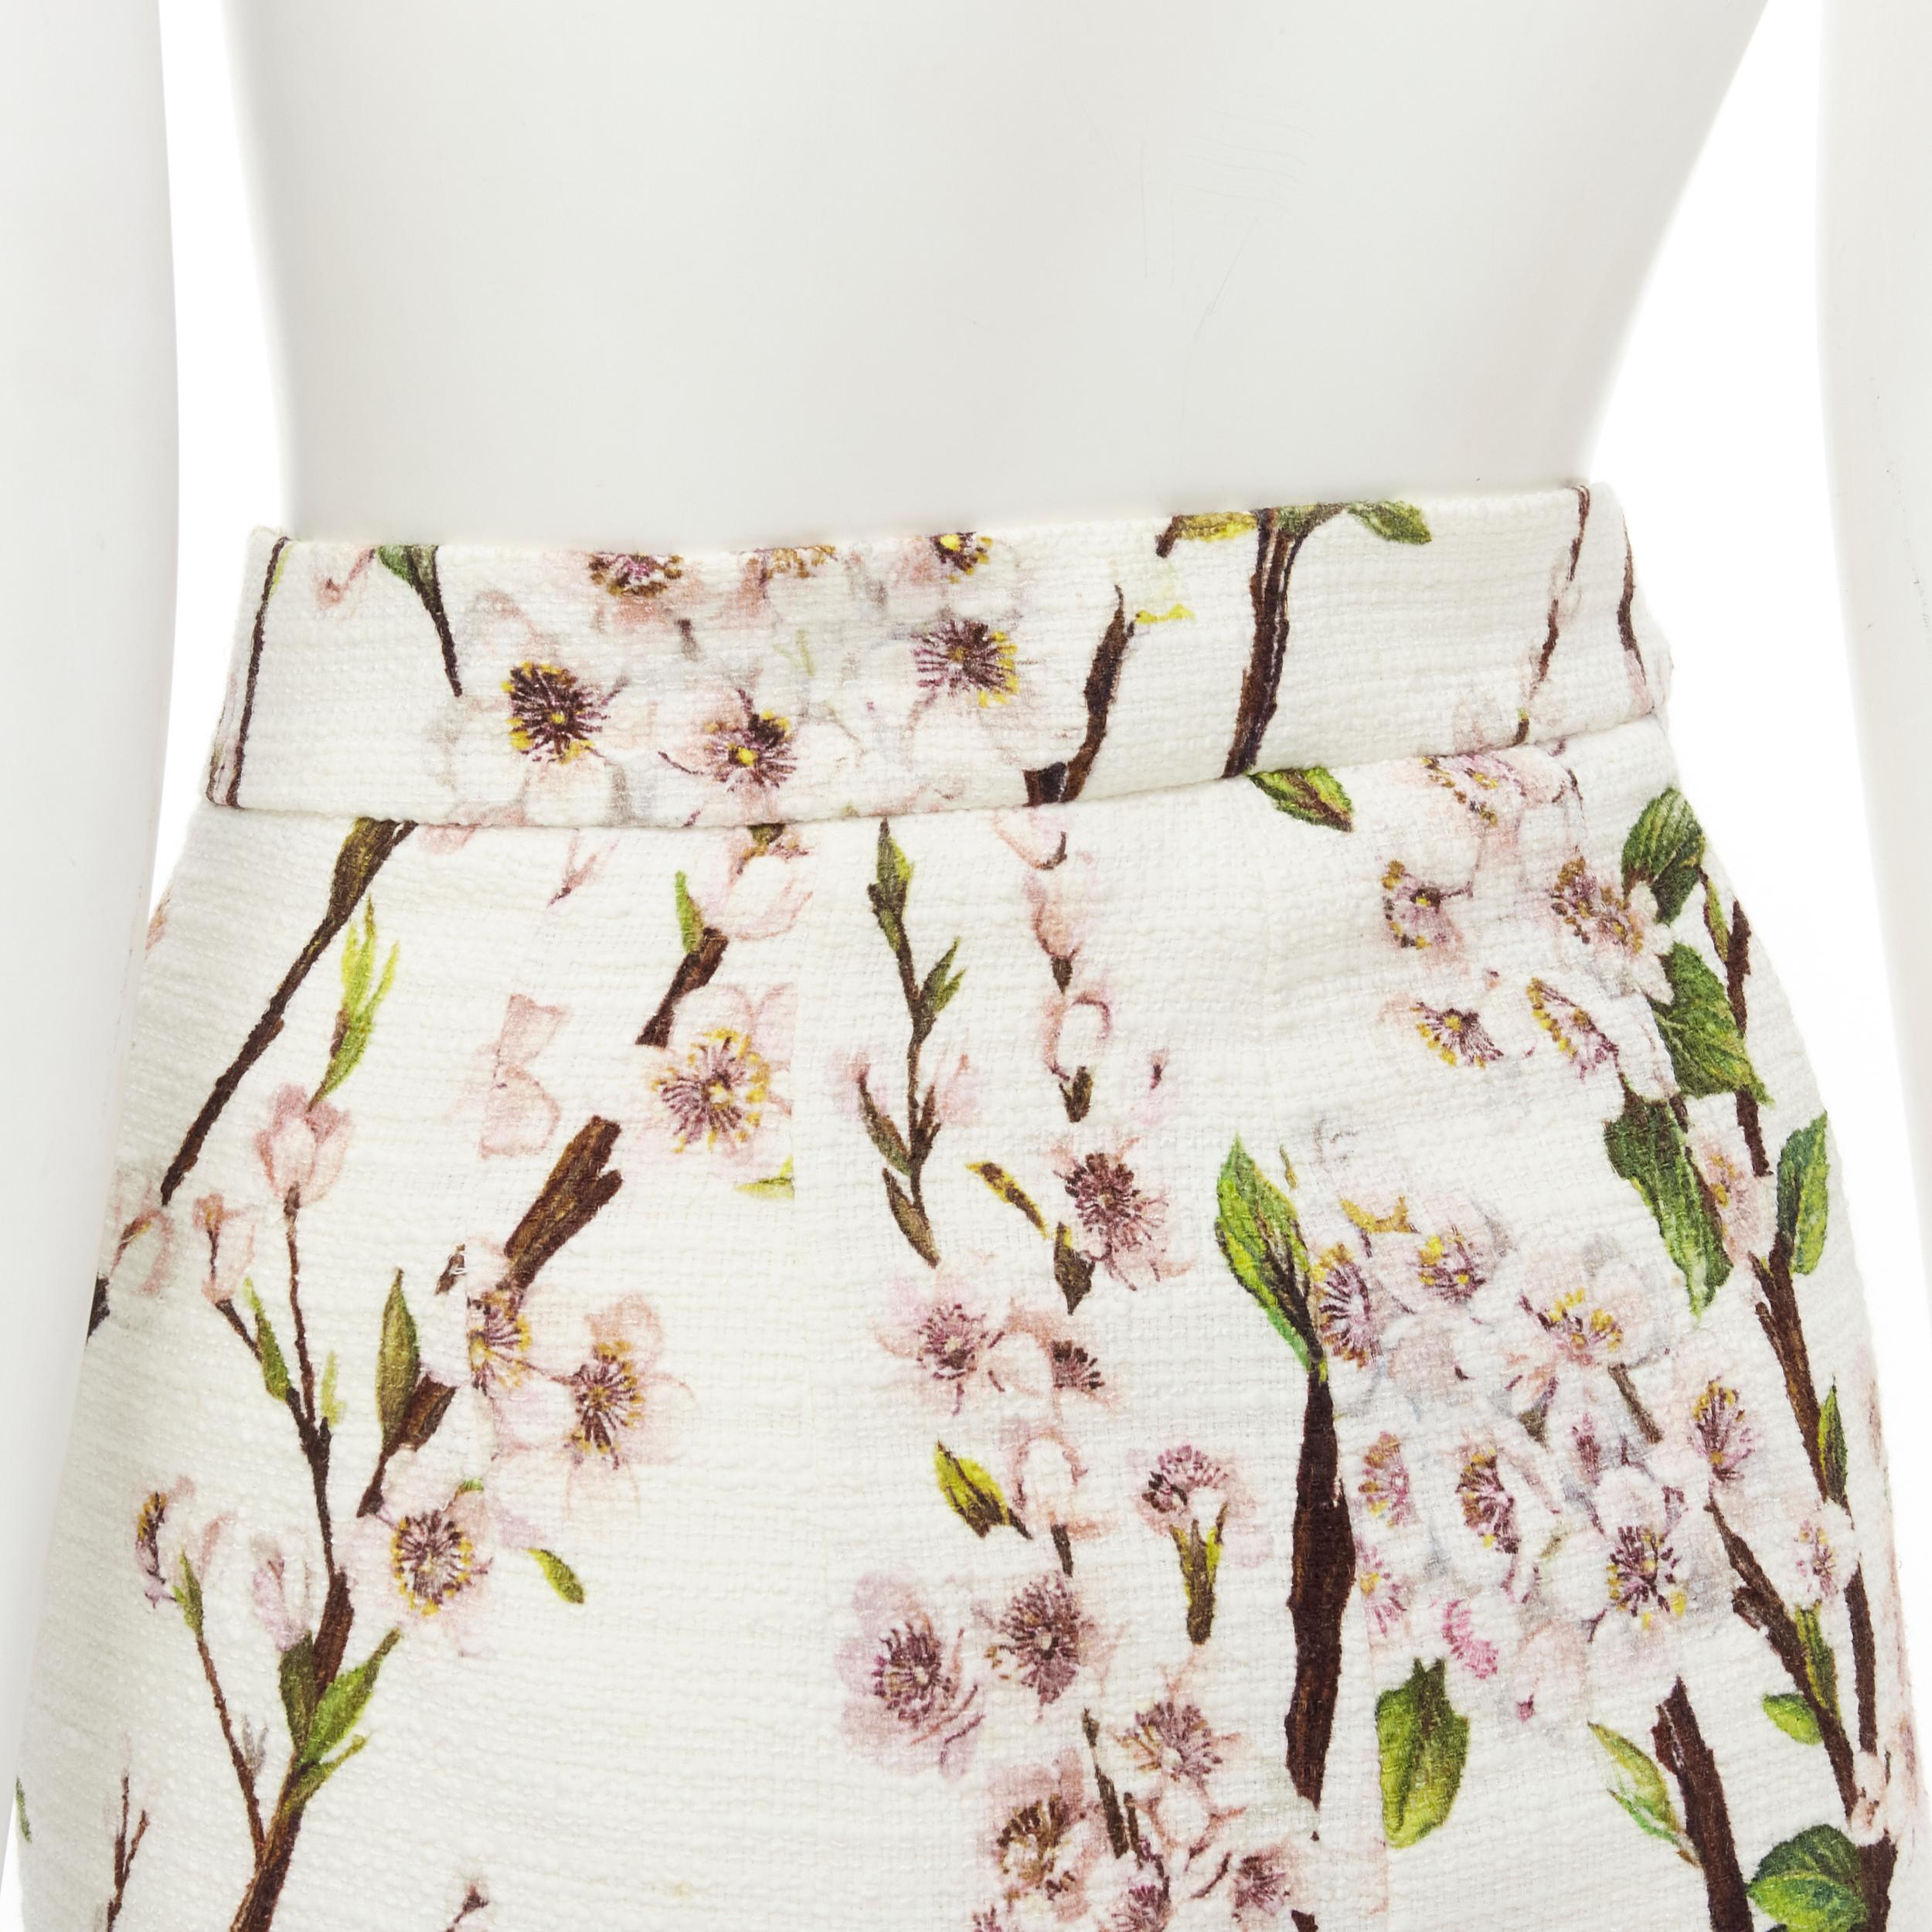 DOLCE GABBANA white pink blossom print tweed boucle mini skirt IT36 XS 
Reference: TGAS/B02056 
Brand: Dolce Gabbana 
Material: Cotton 
Color: White 
Pattern: Floral 
Closure: Zip 
Made in: Italy 

CONDITION: 
Condition: Excellent, this item was